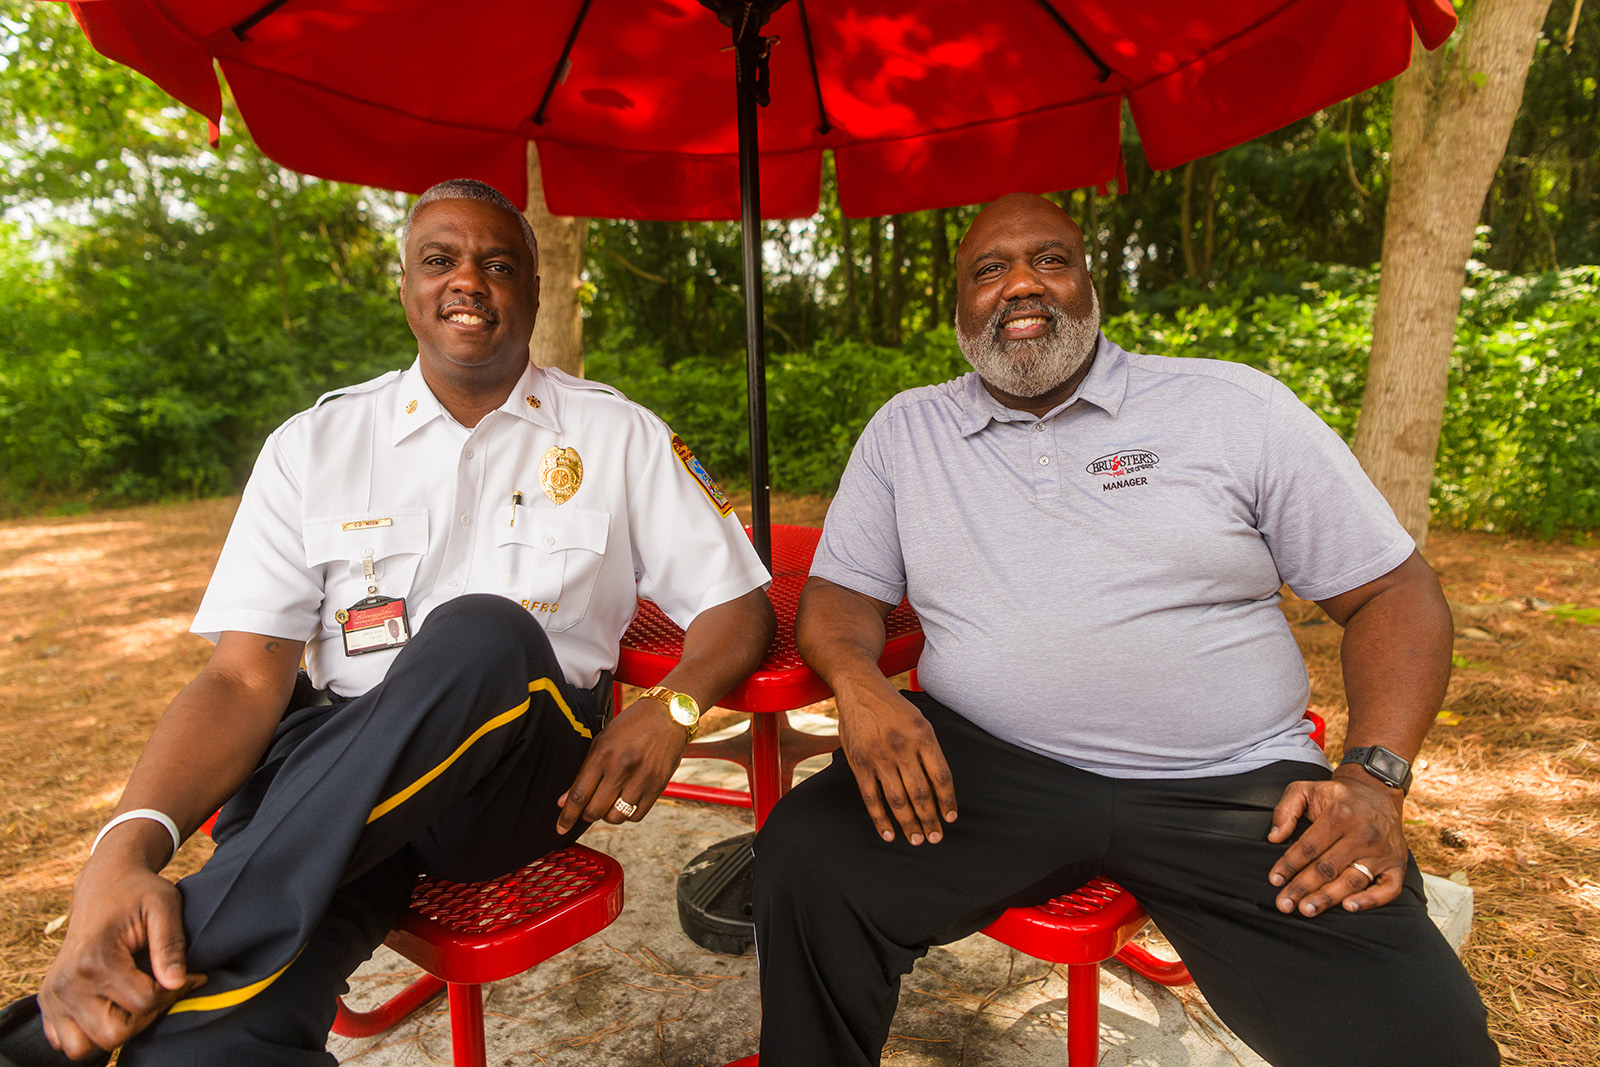 Birmingham Fire Chief Cory Moon and his older brother share a gift of love and life